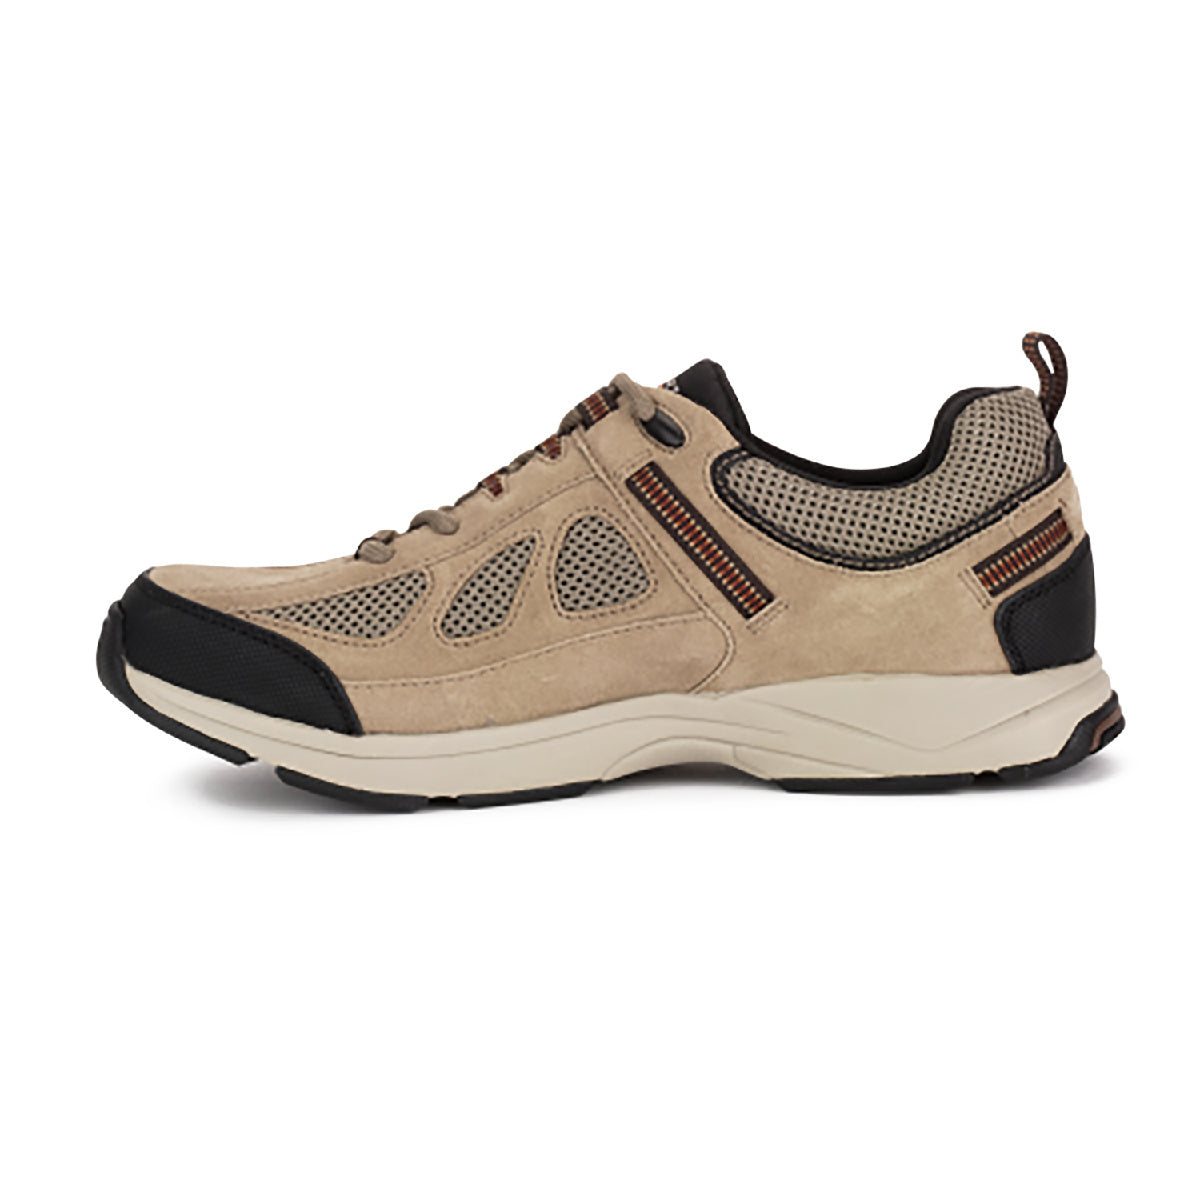 Rock Cove Lace Up – Rockport